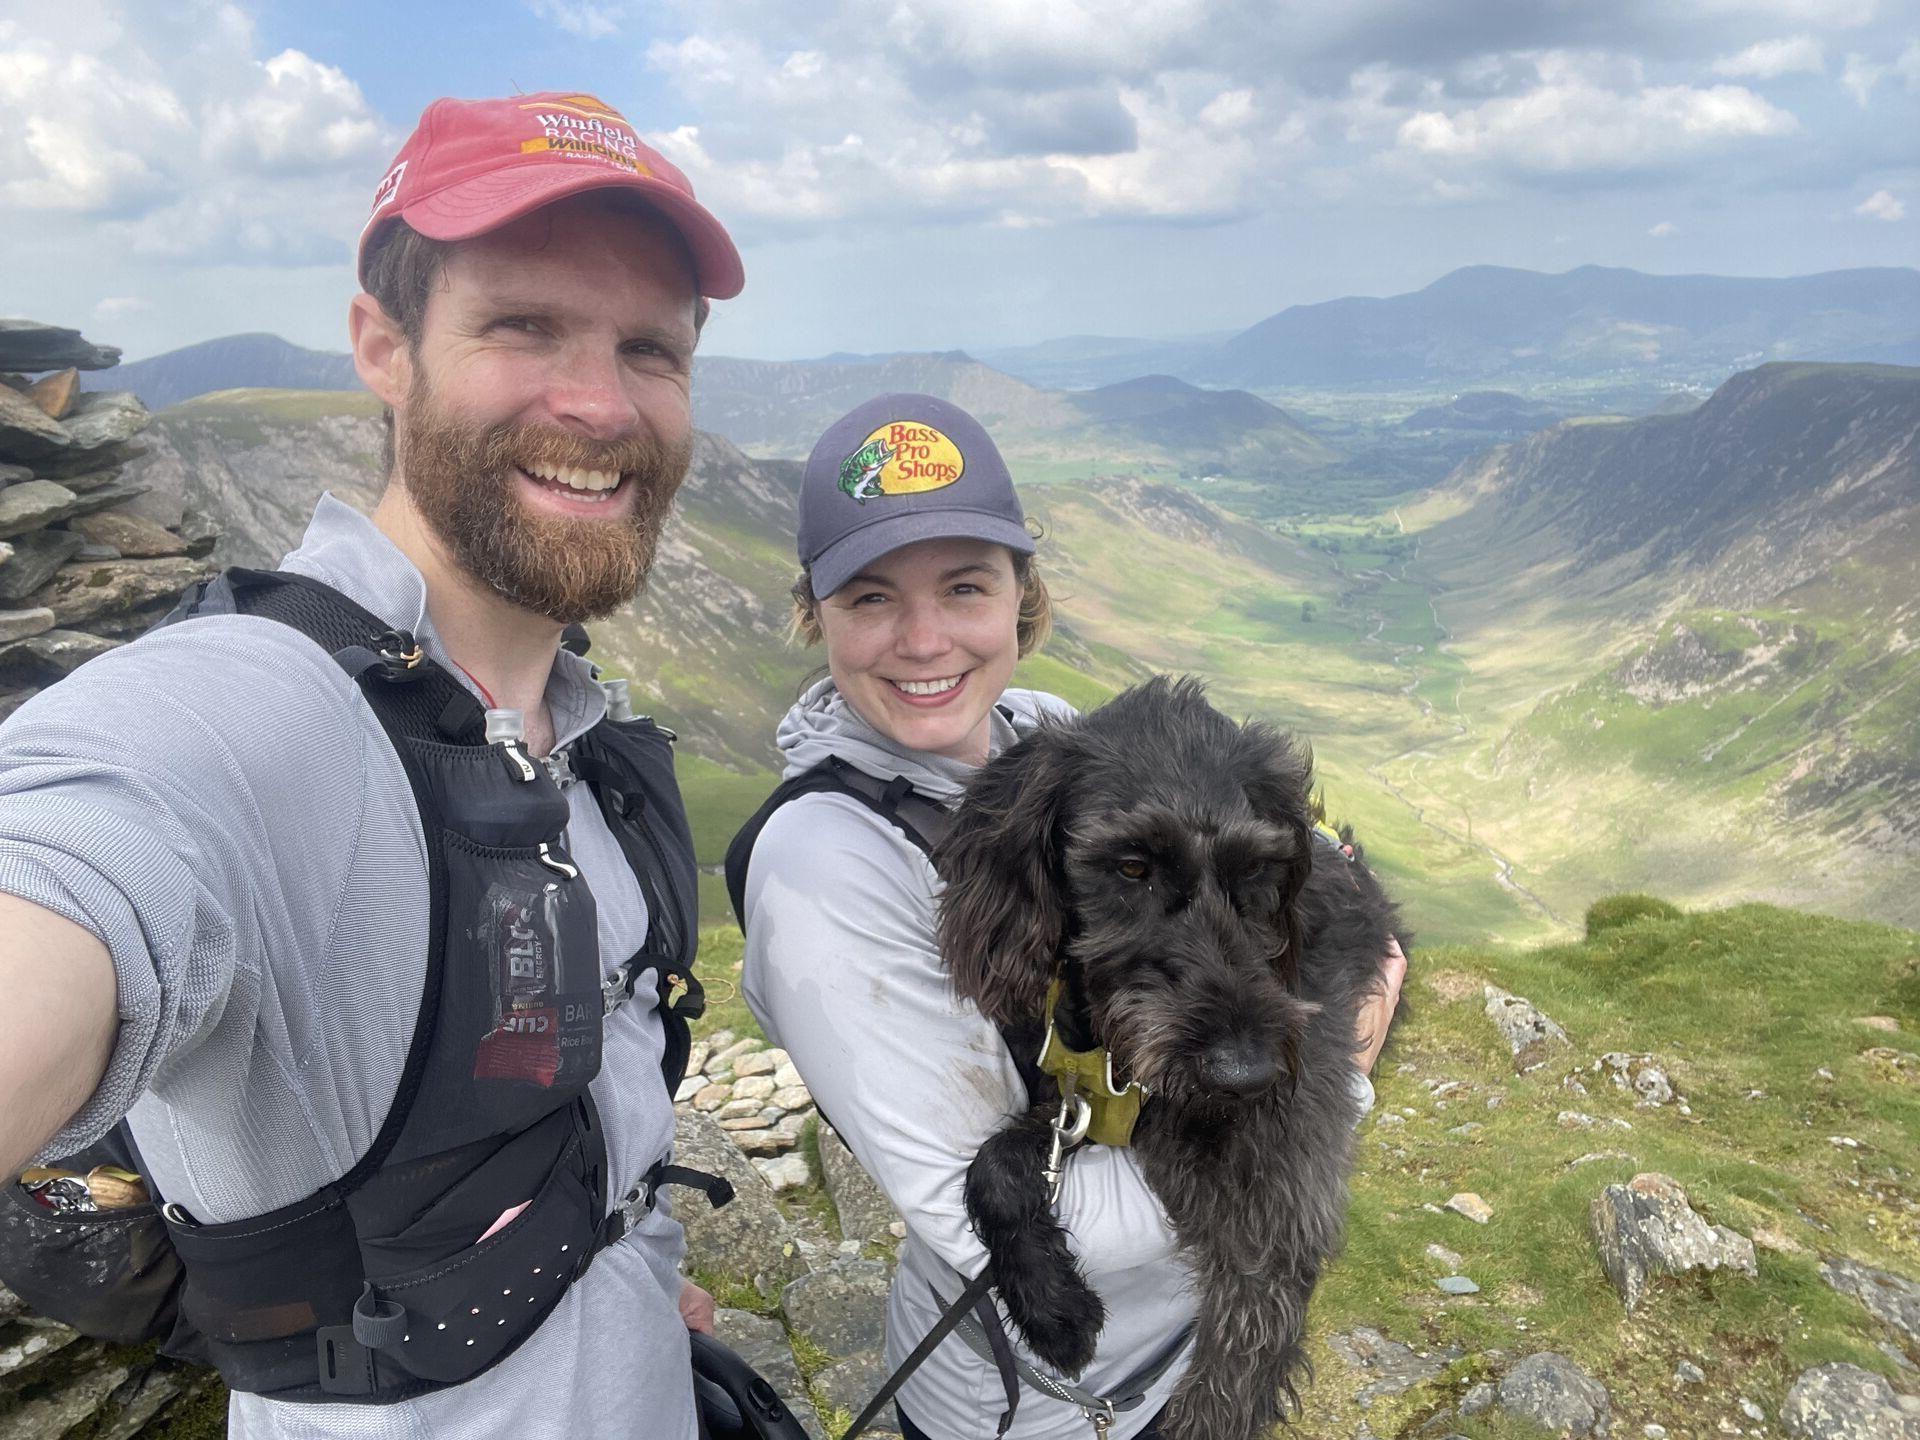 Ghyll, Sam, and I at the top of Dale Head in the Lake District, looking down the dale towards Littletown